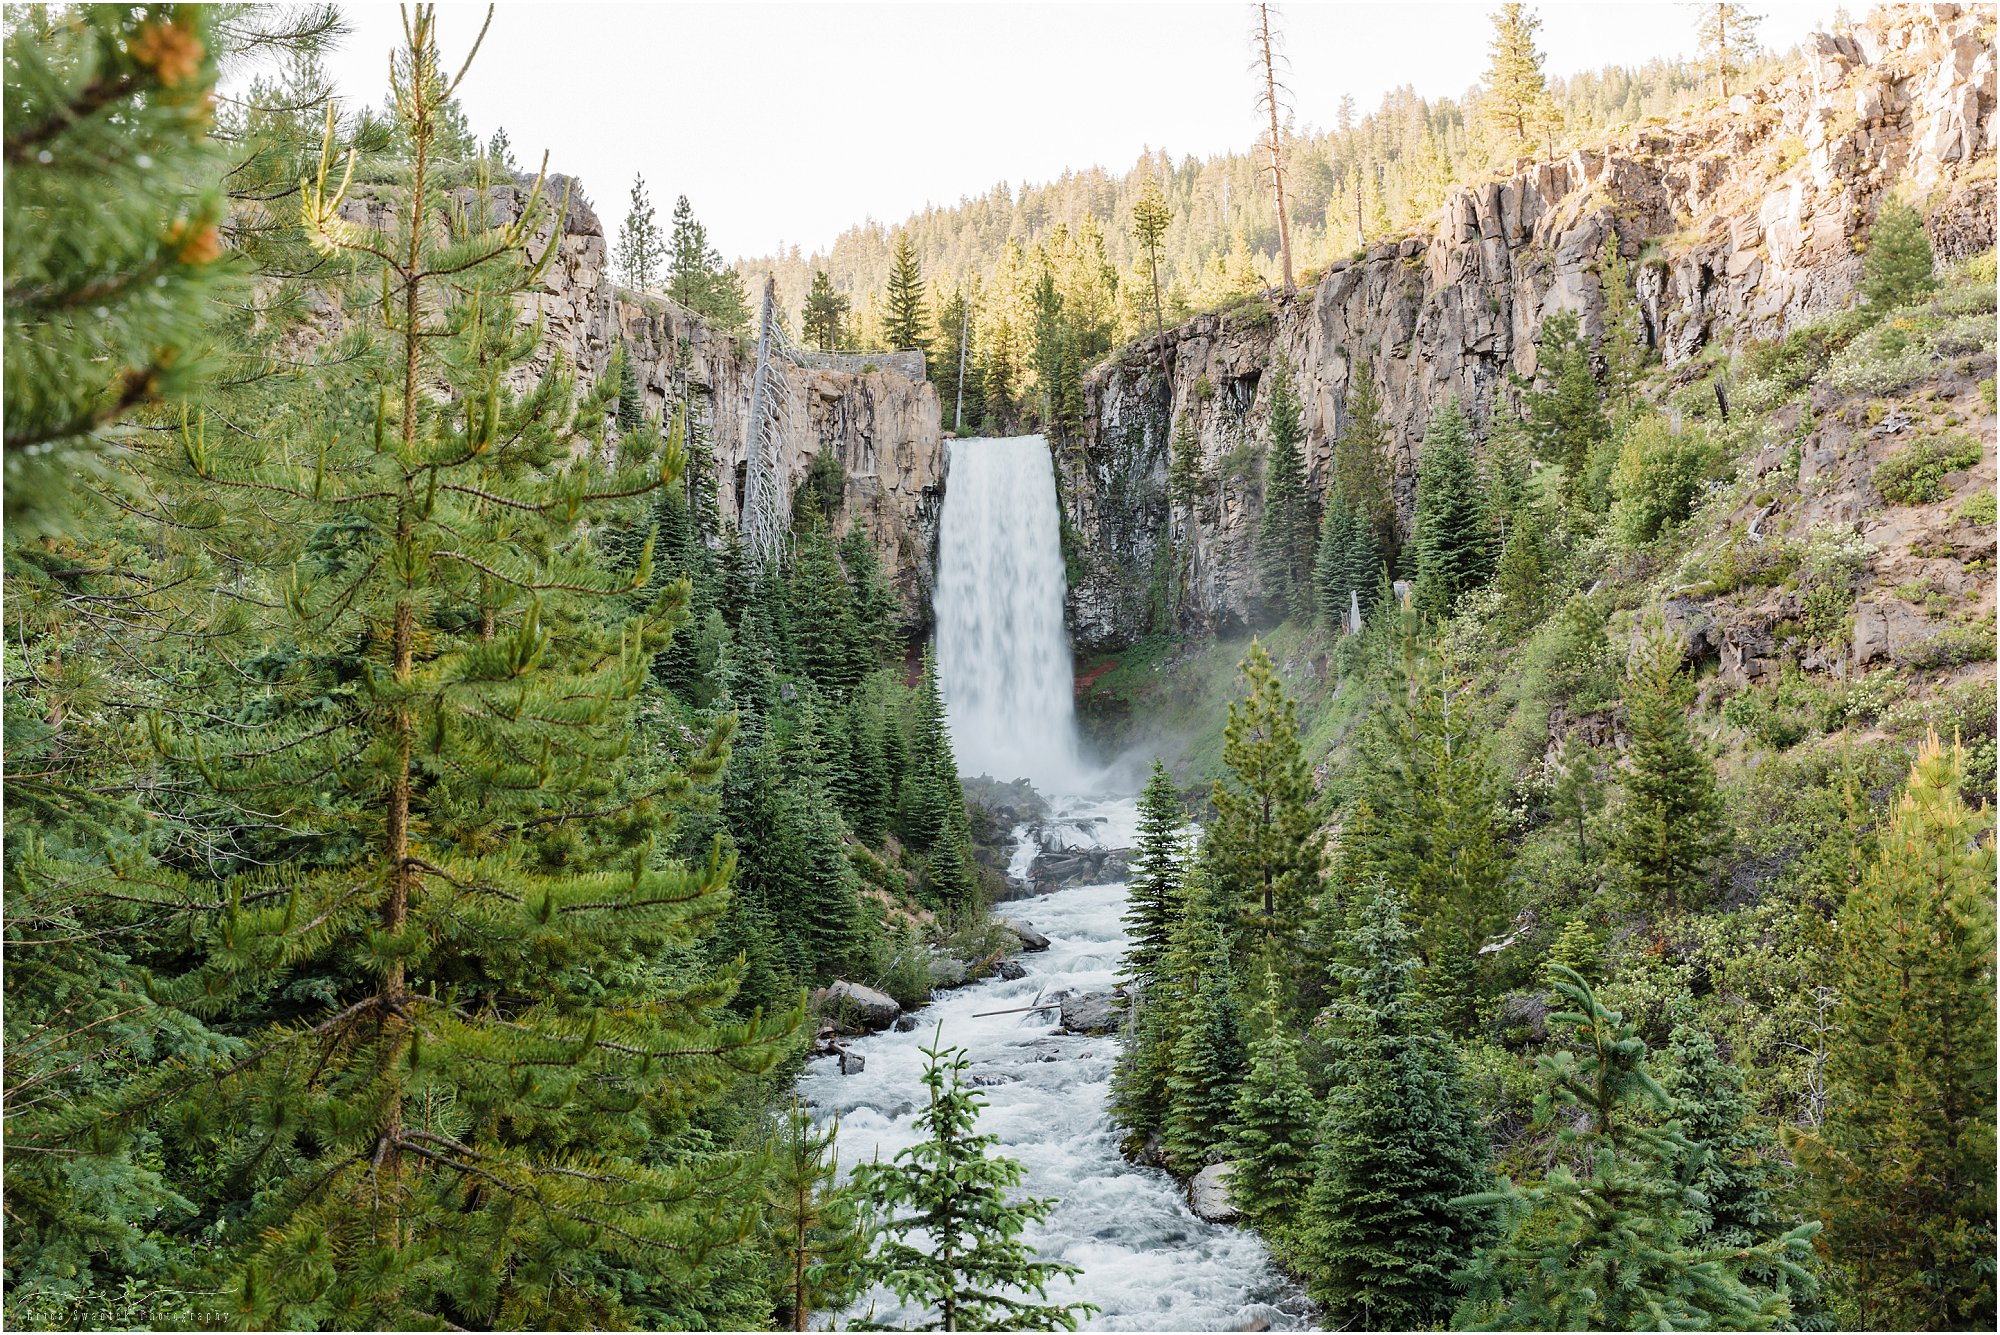 A gorgeous photograph of Tumalo Falls in Bend, OR by Bend wedding photographer Erica Swantek Photograpy.